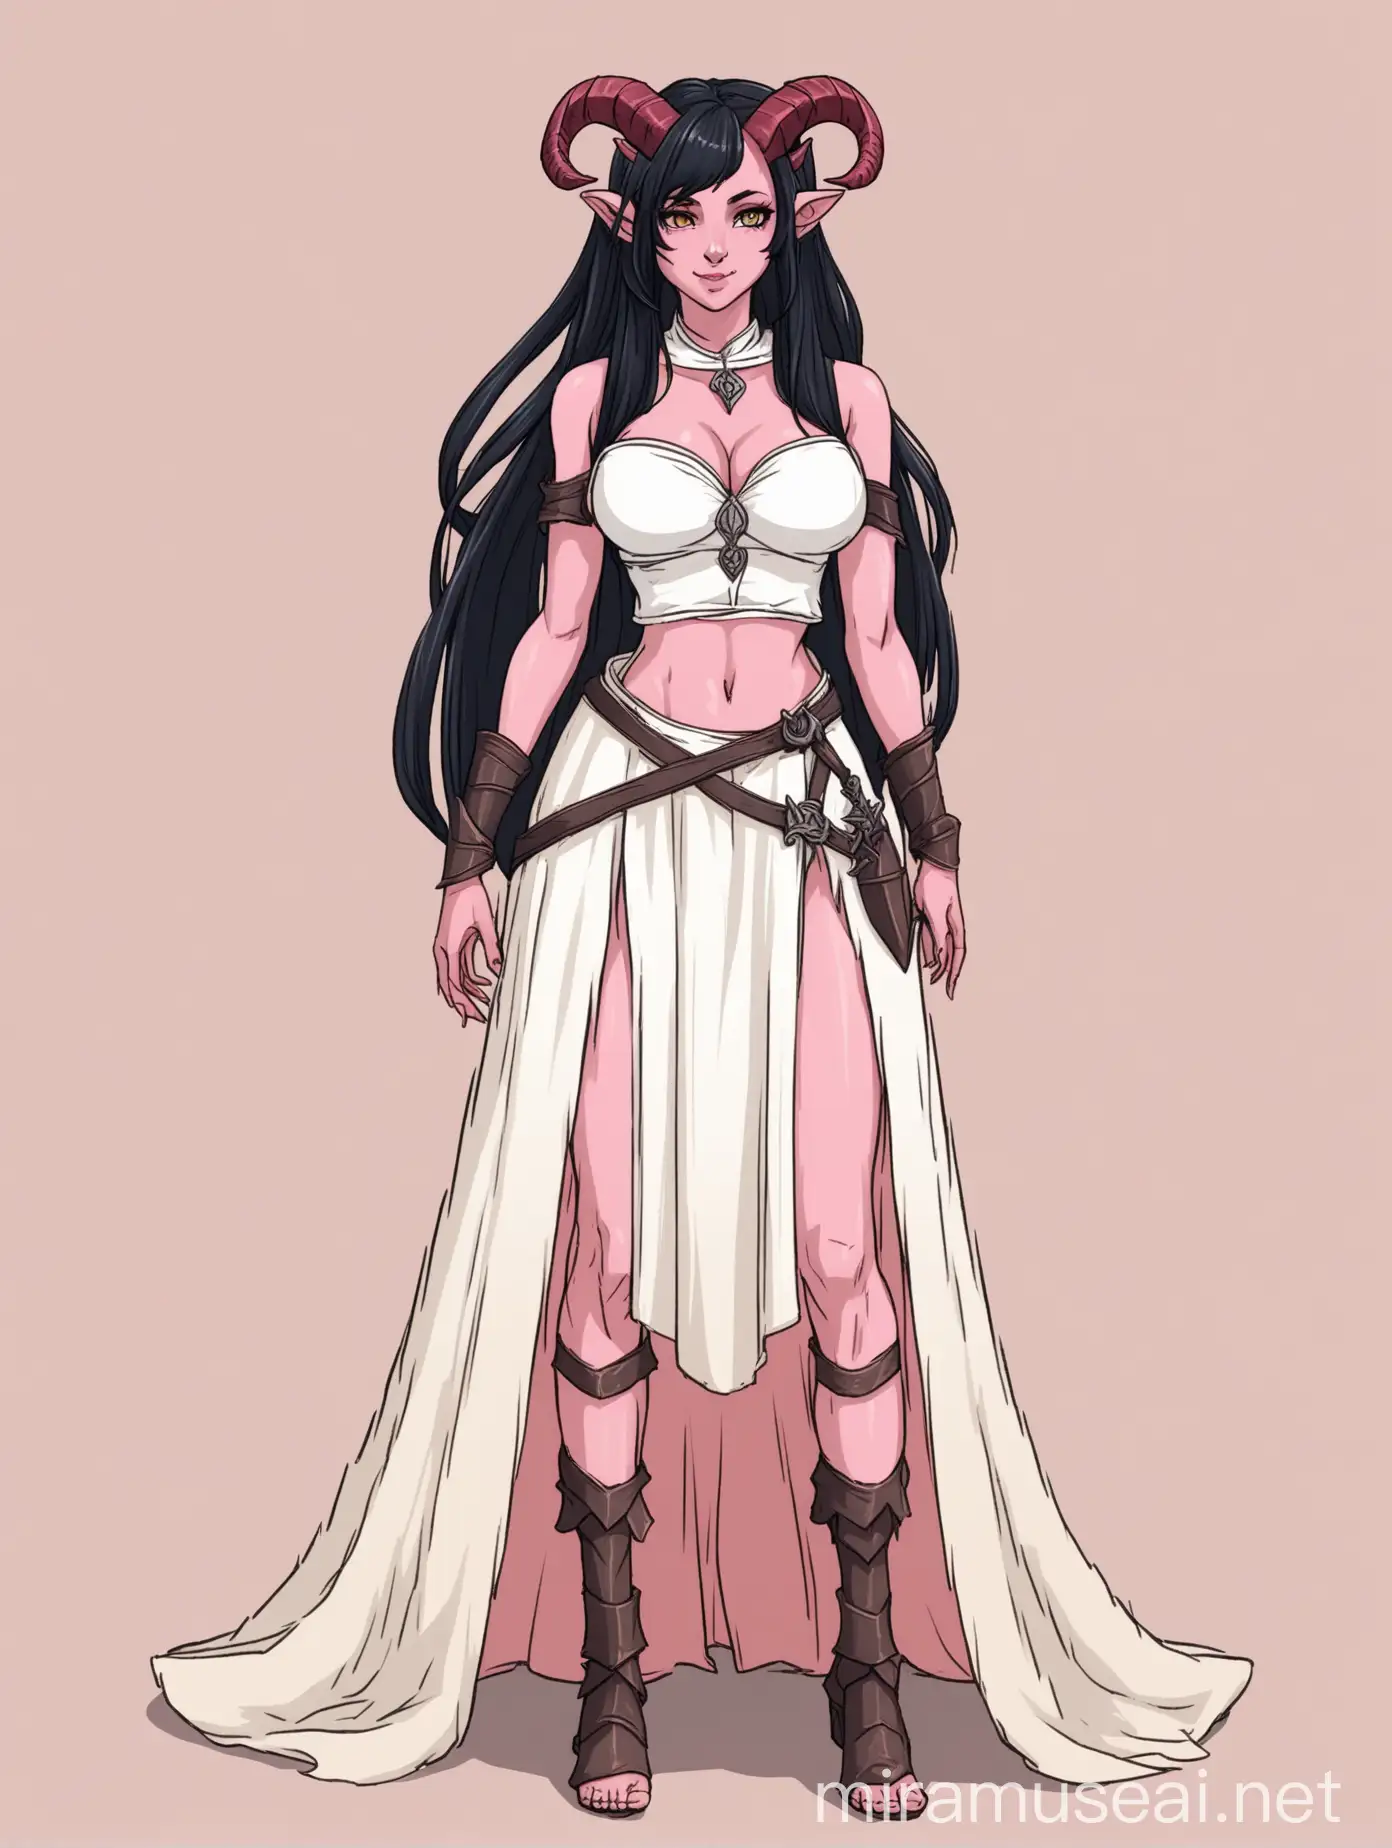 Seductive Female Tiefling in Medieval Attire with Pastel Pink Skin and Black Hair